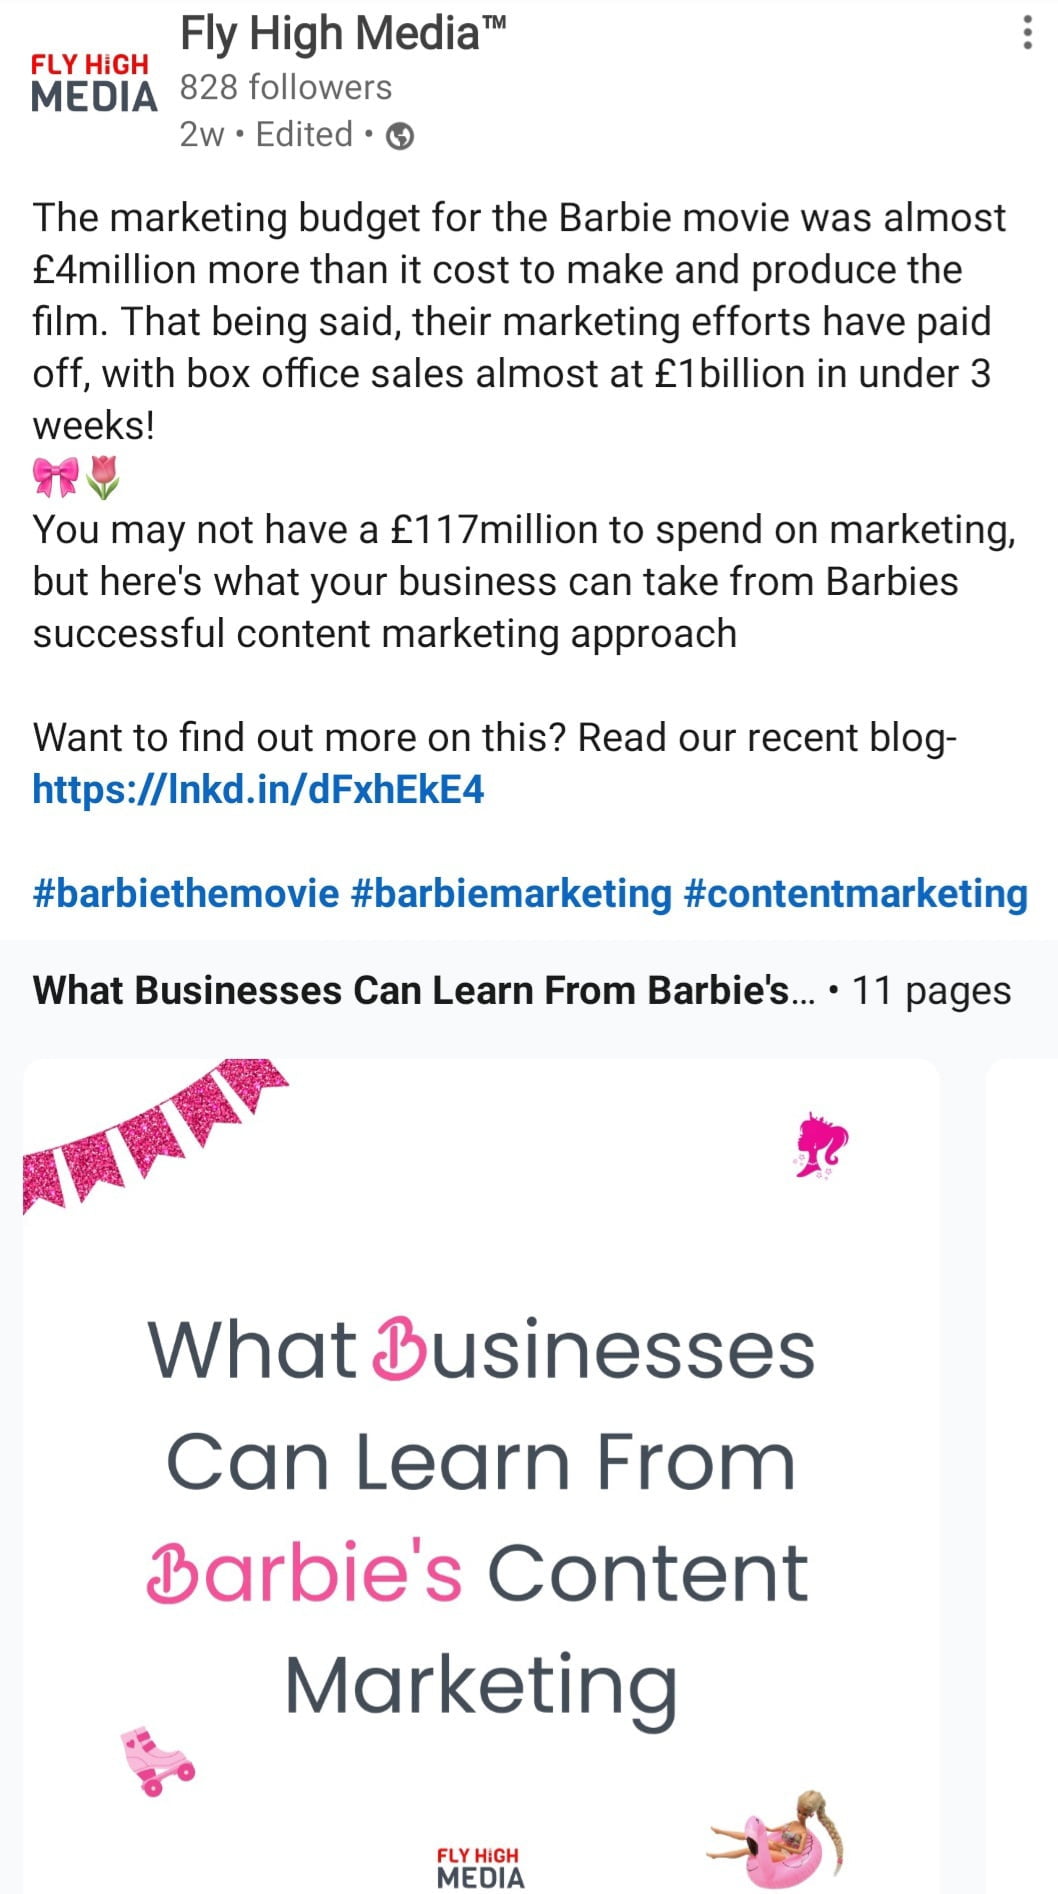 LinkedIn post about Barbie's Content Marketing